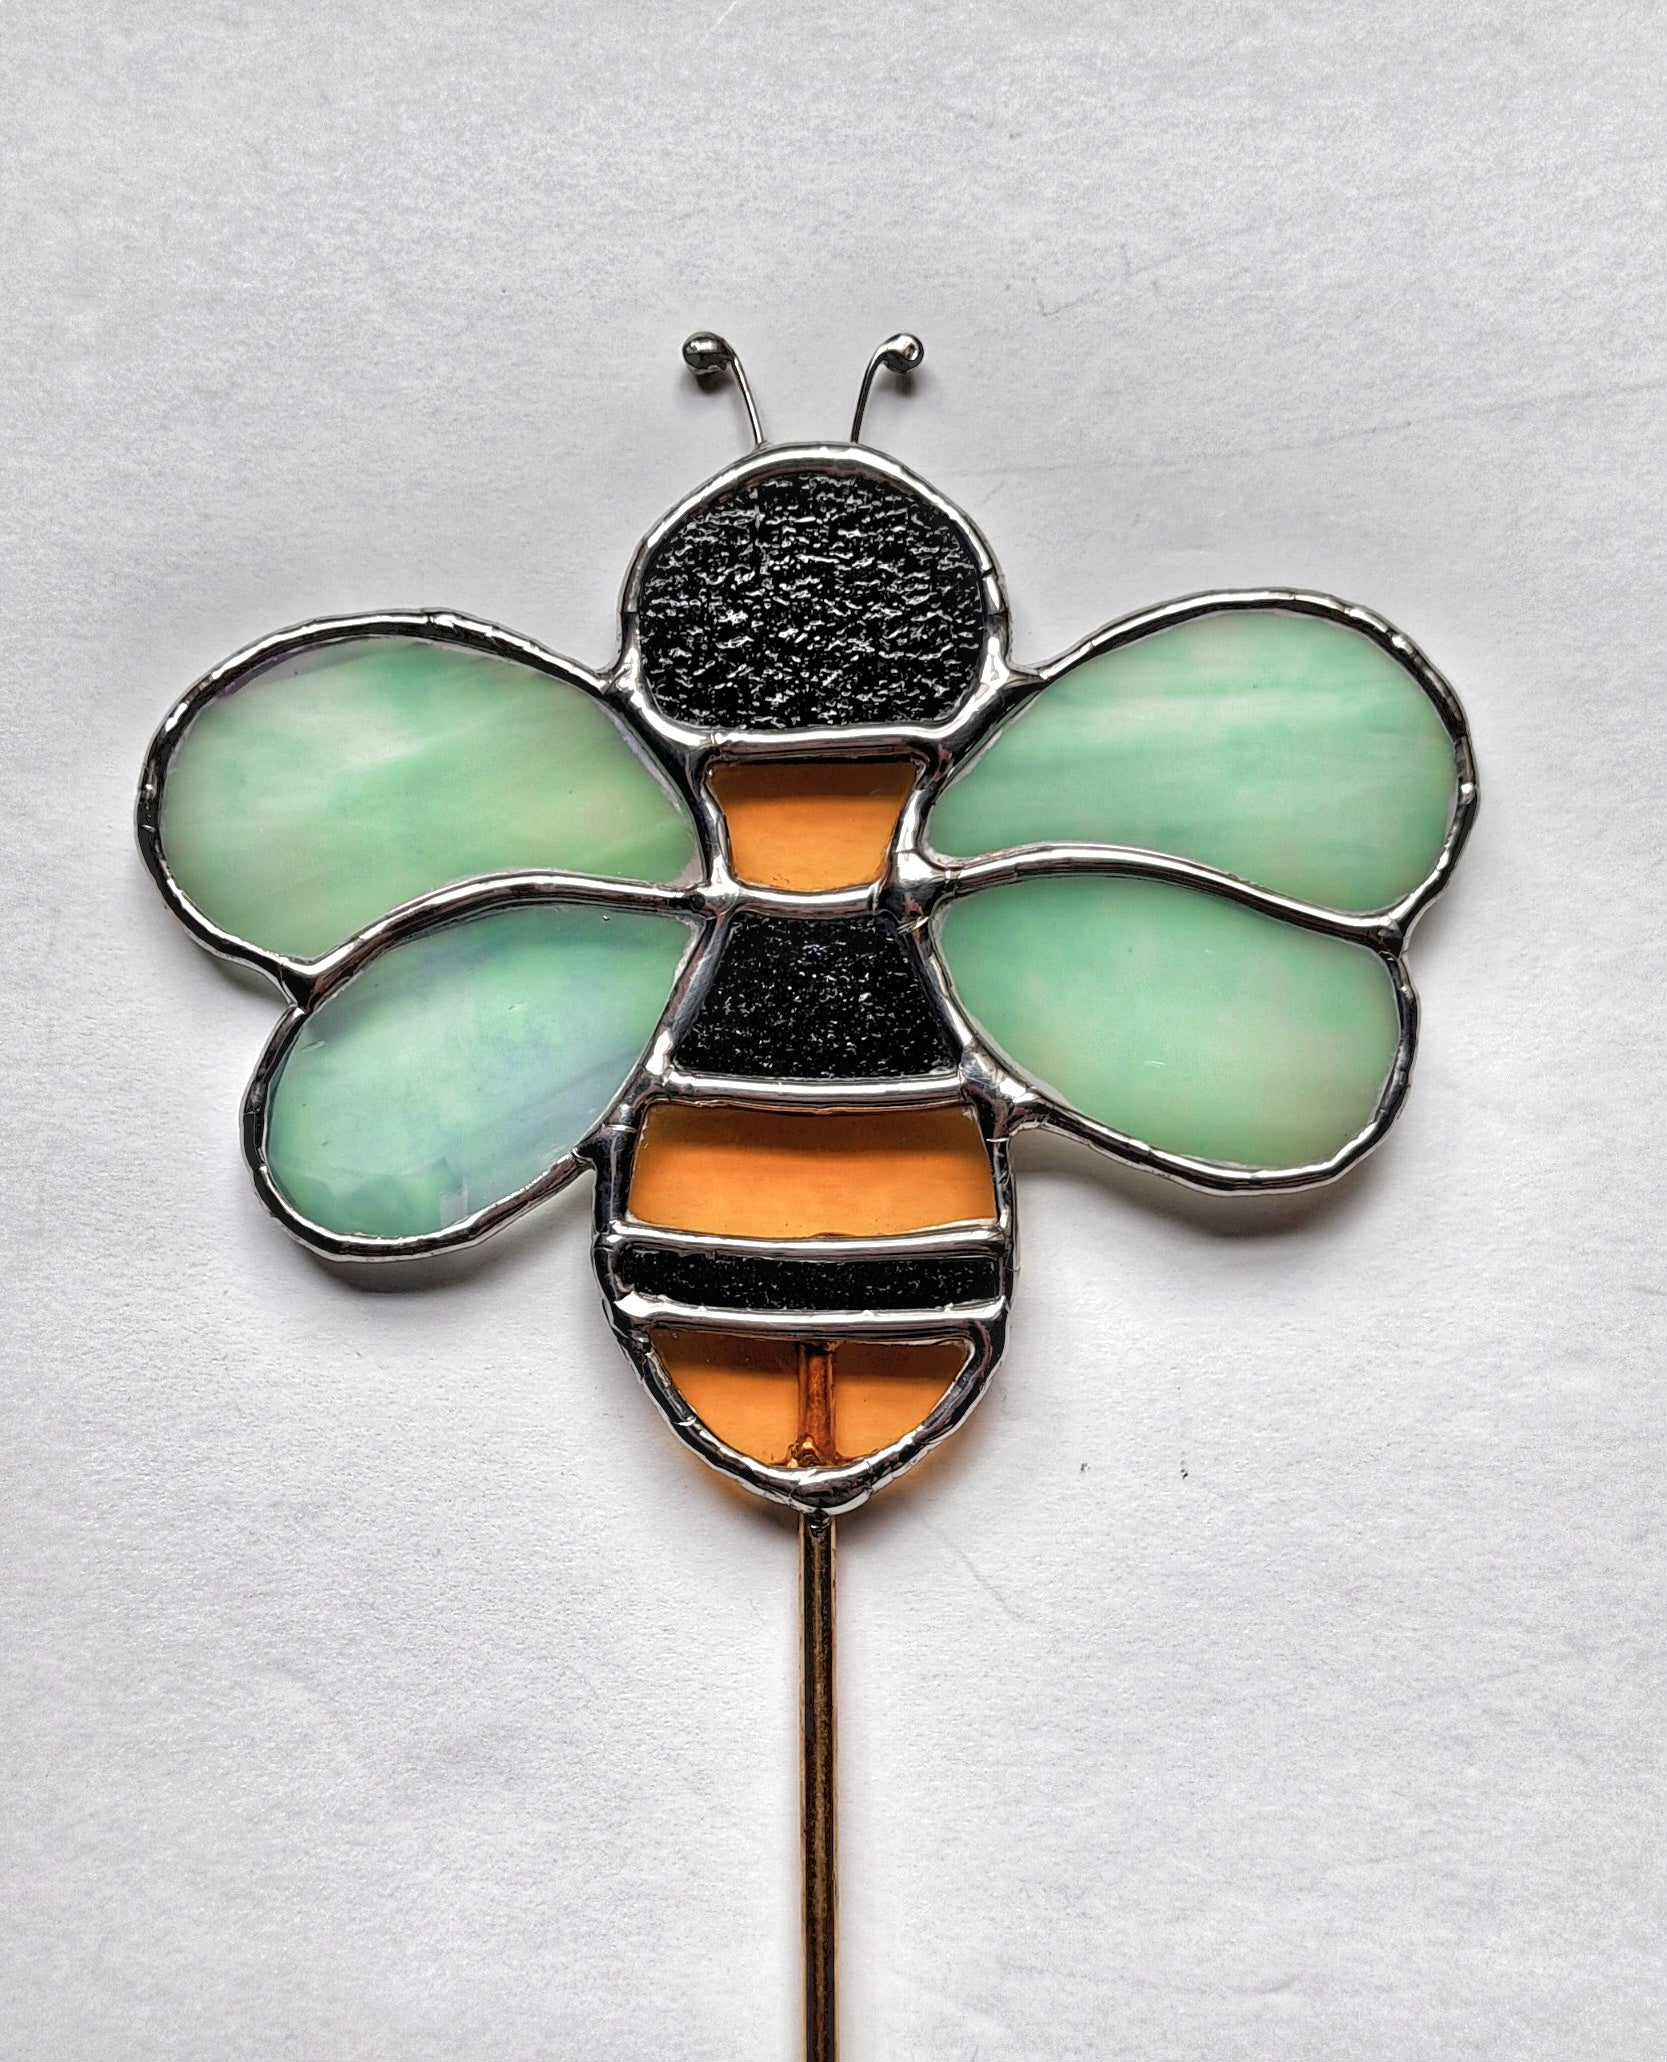 This bee is handcrafted with textured black and yellow glass for the body and iridescent glass for the wings.